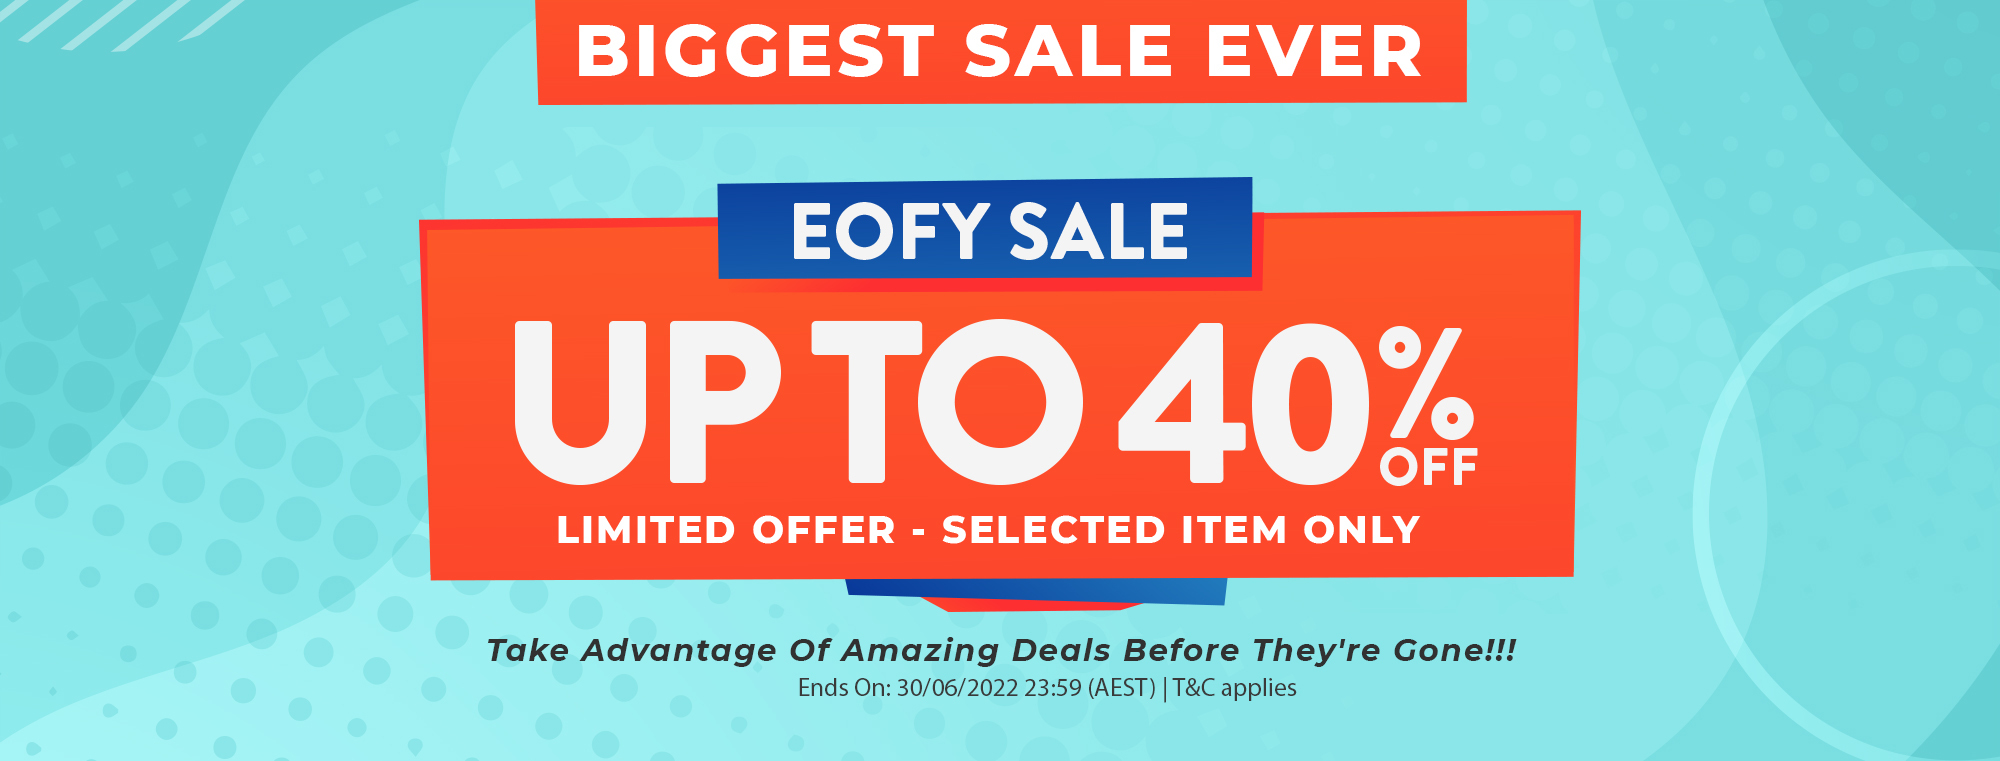 End of Financial Year (EOFY) Sale - Upto 40%